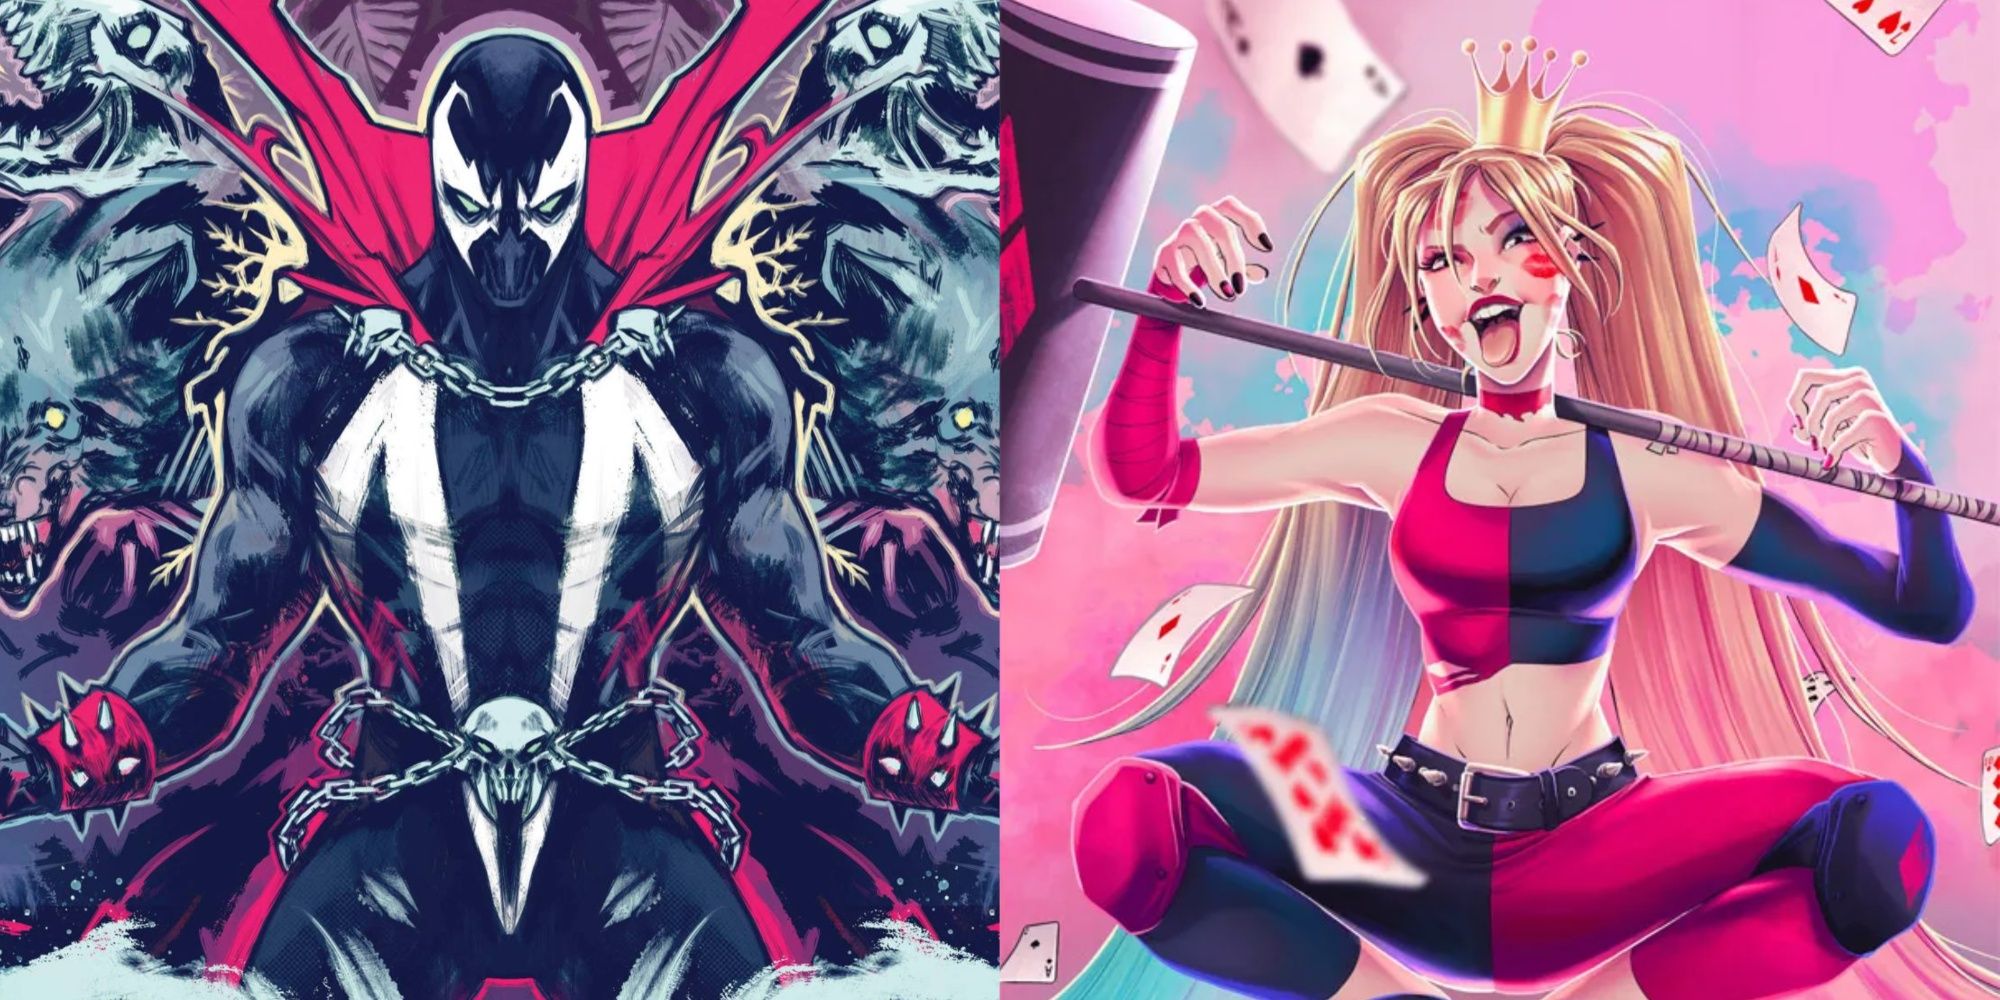 Split Image of AllAgainst All Spawn and Sweeney Boo's Harley Quinn Squatting with a crown and her tongue out